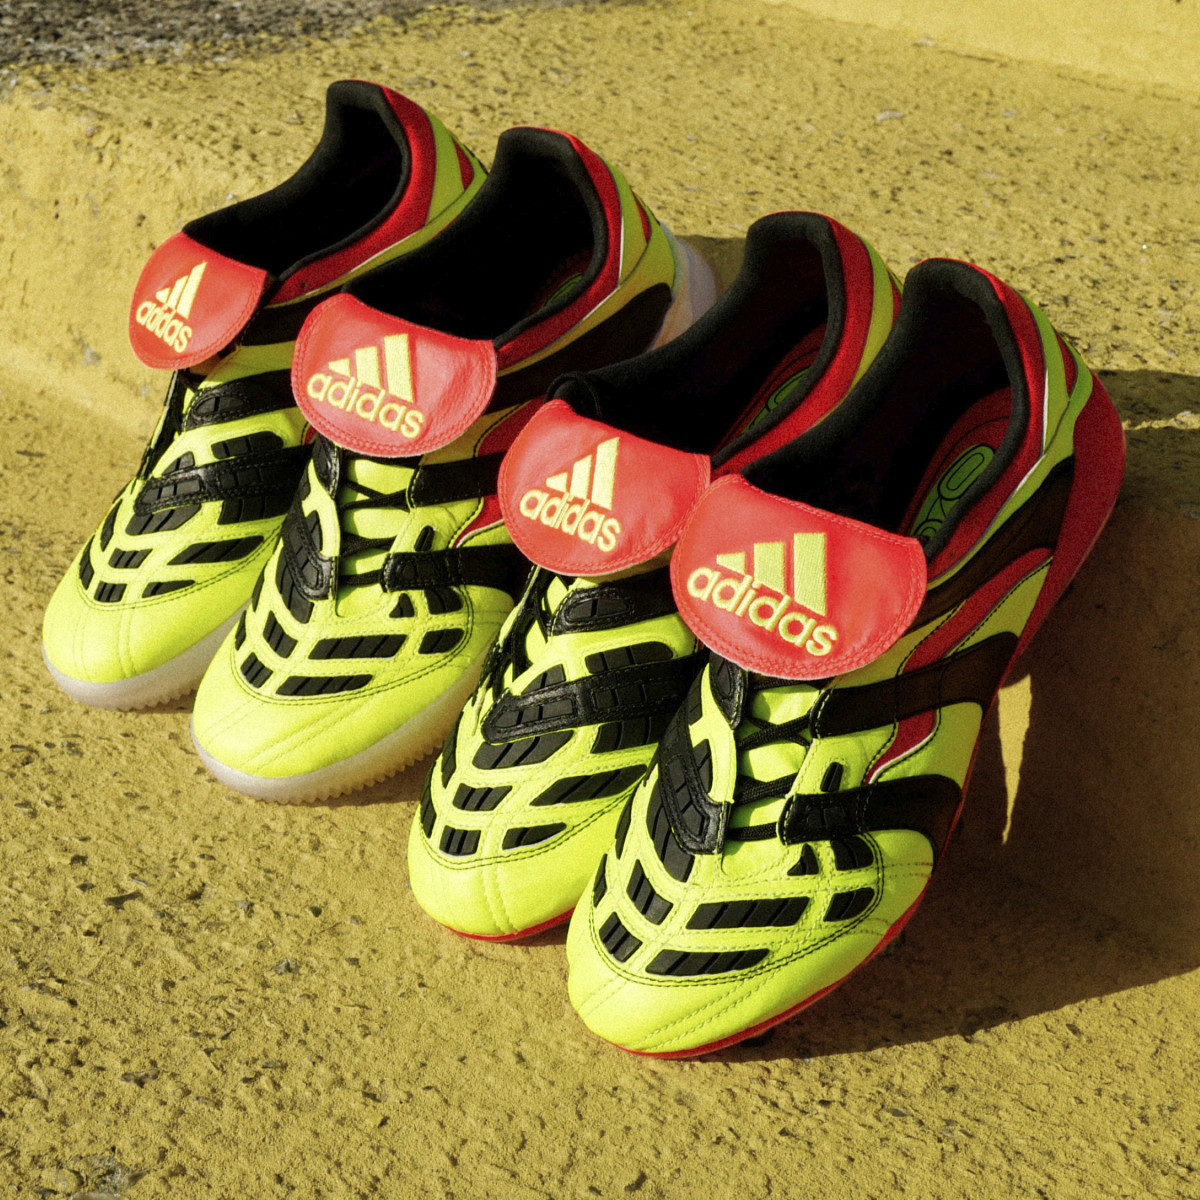 adidas Launch New Predator Accelator Electricity Inspired By Original 1999 Boots Illustrated